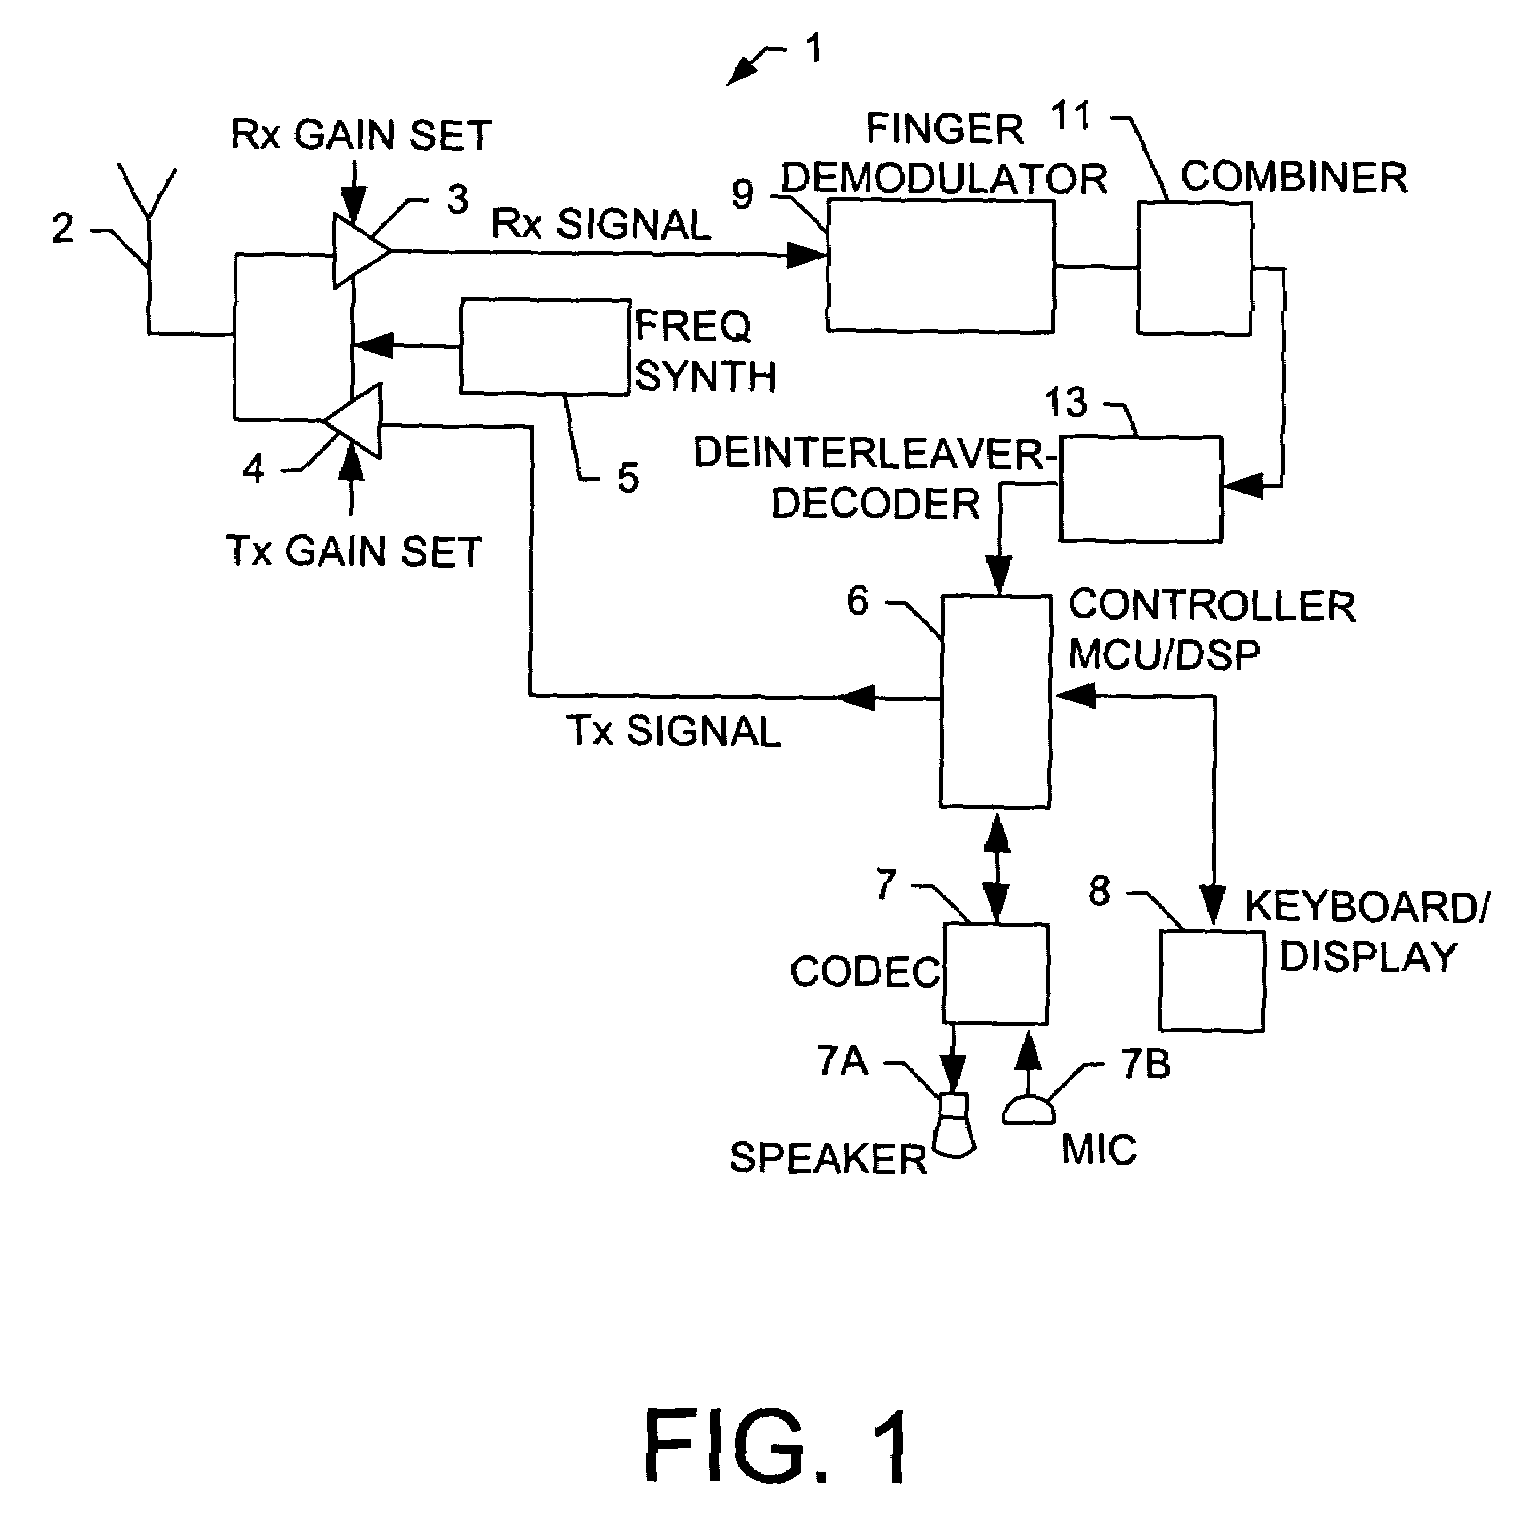 Interference suppression in a receiver during at least one of idle state and access state operation